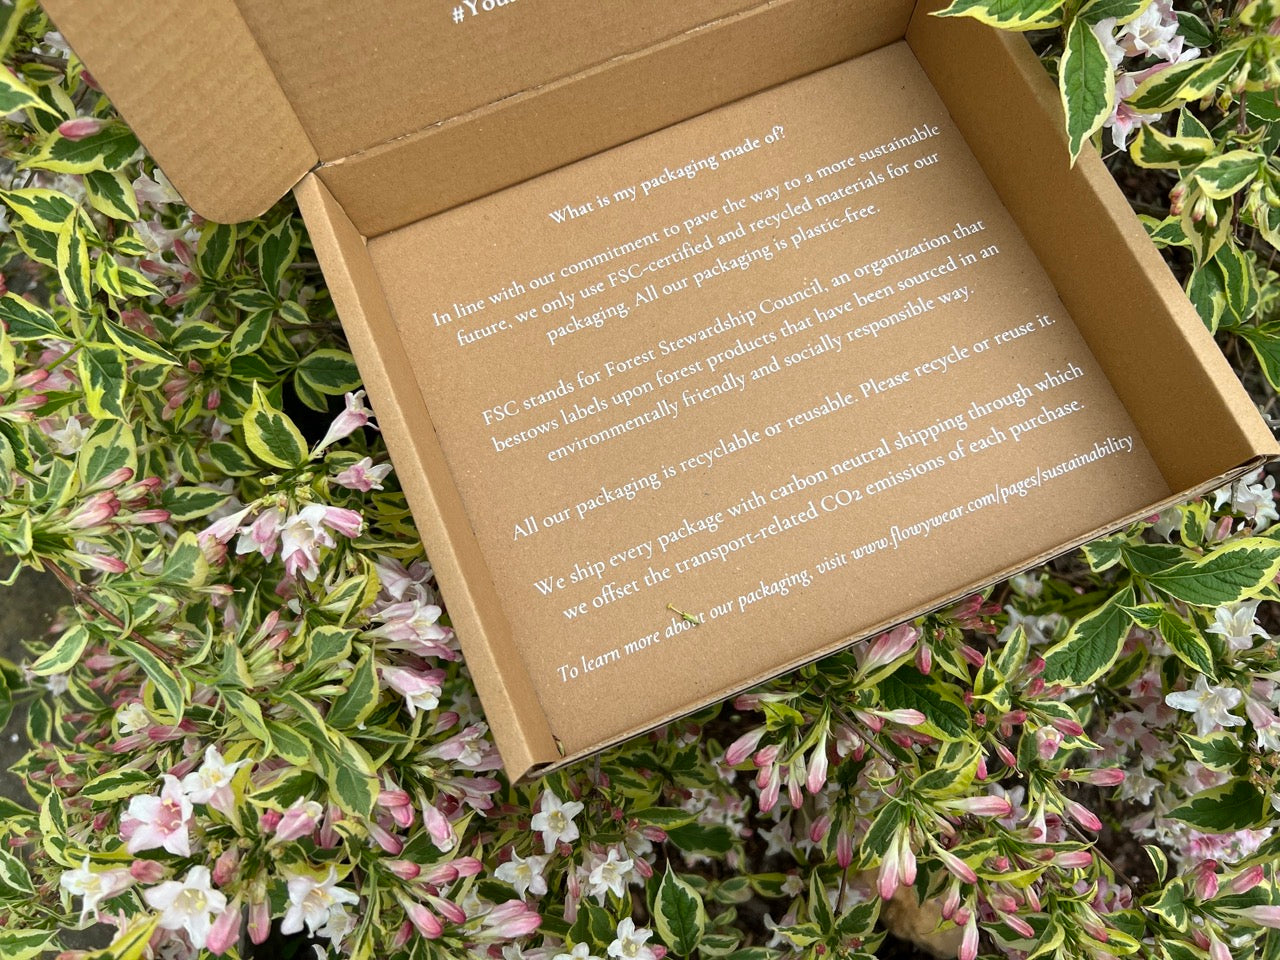 Close up of the messages written inside of the FLÕWY packaging box